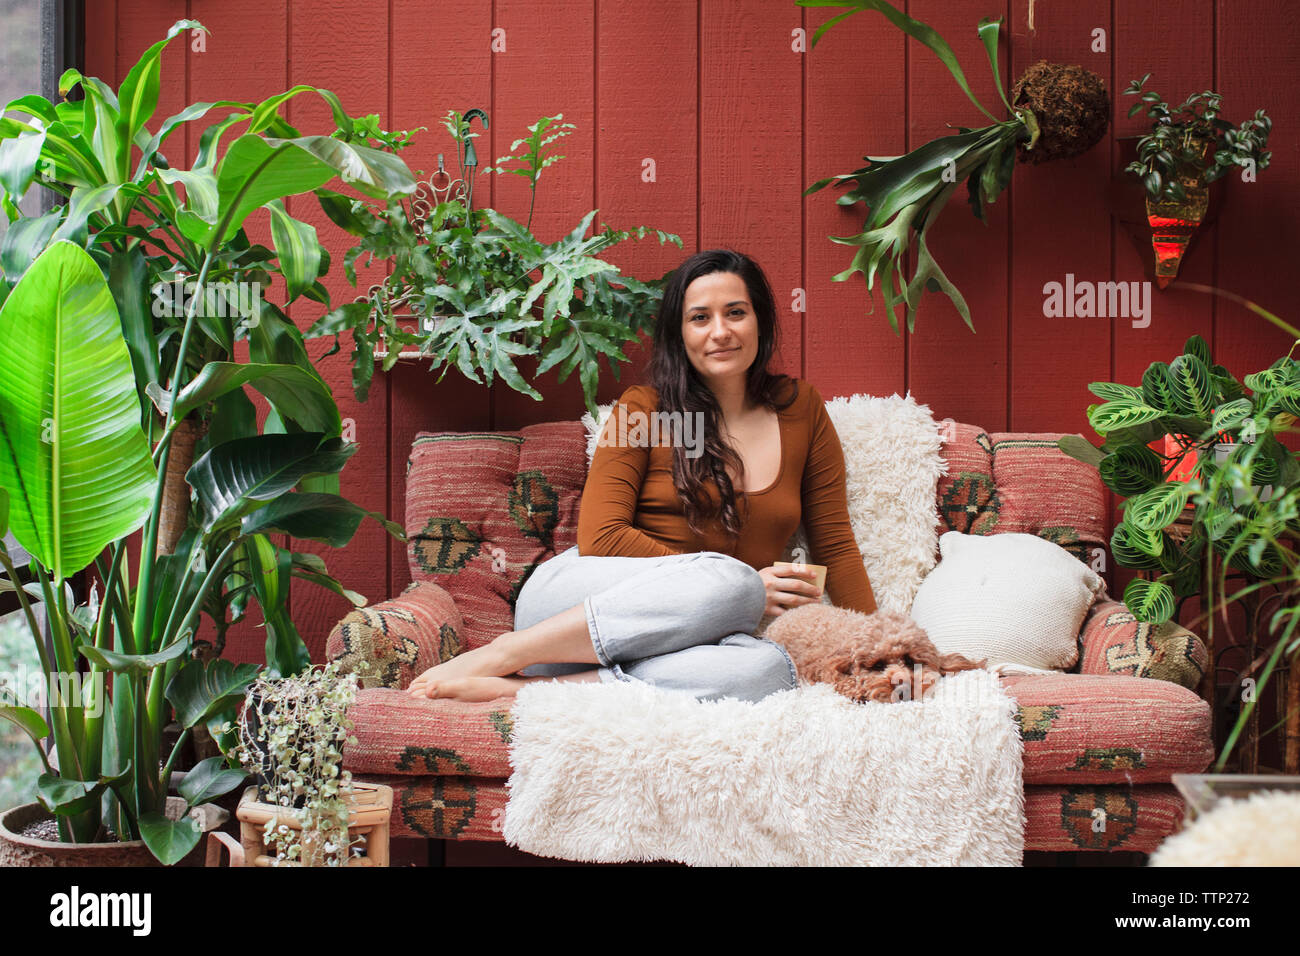 Portrait of young woman with poodle resting on sofa amidst potted plants at porch Stock Photo